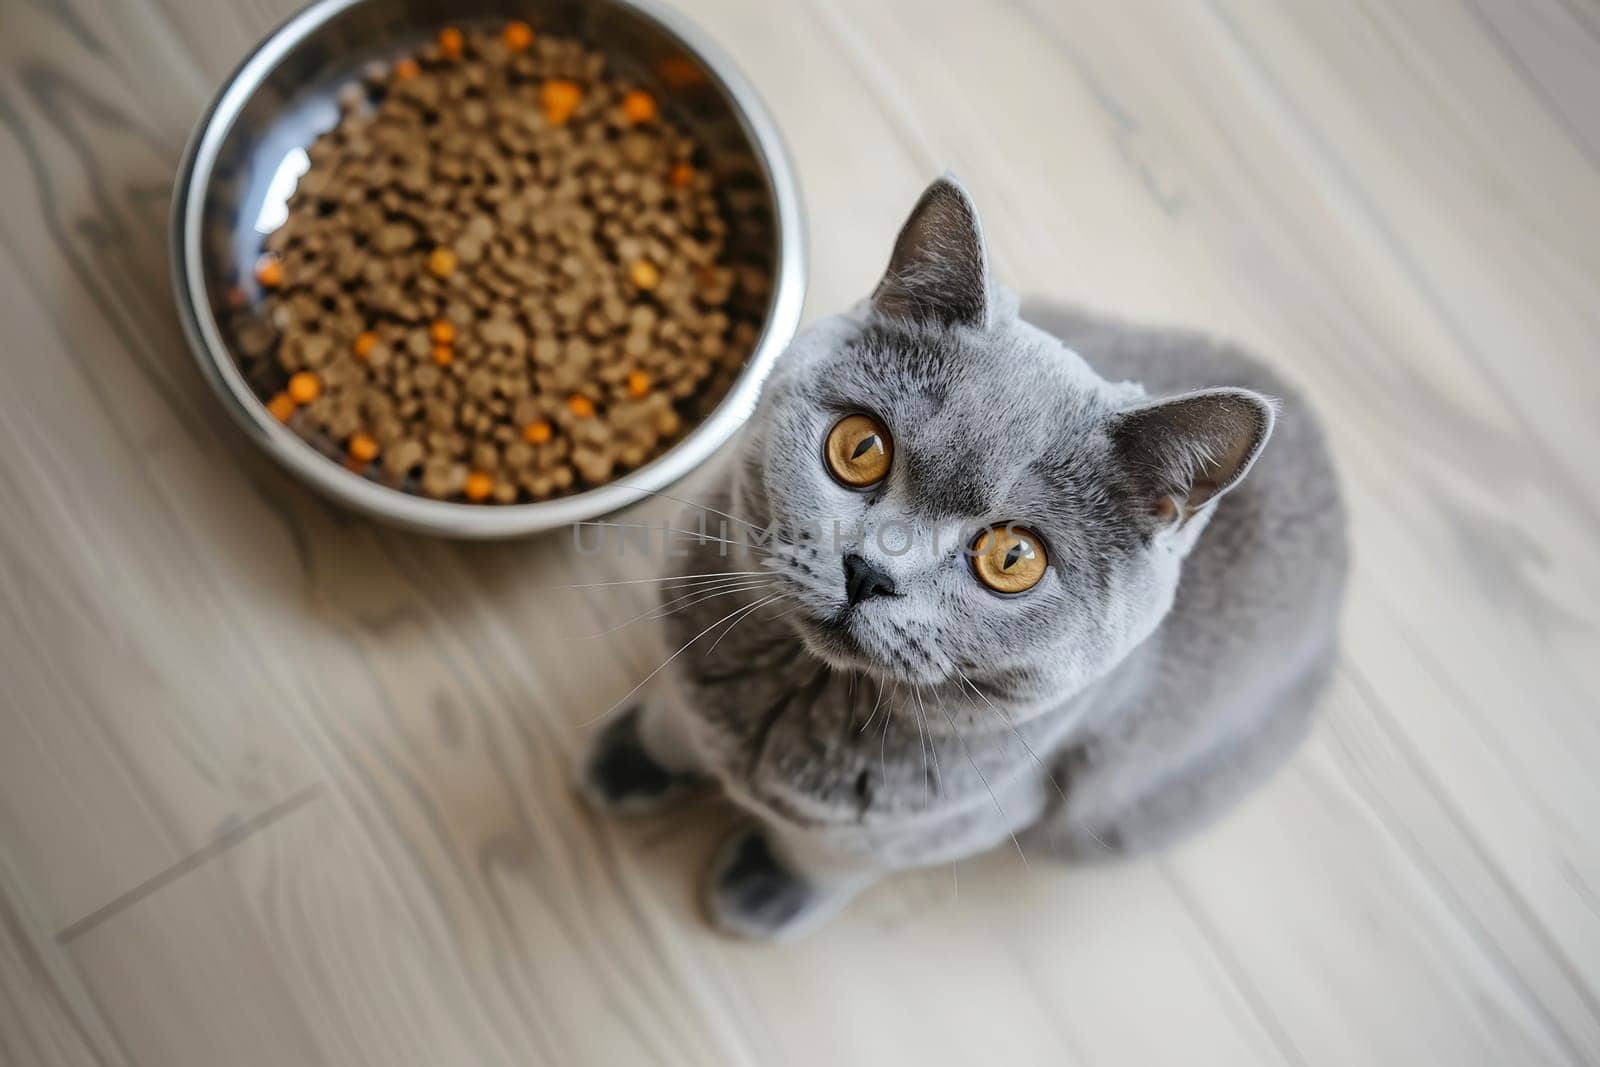 A cat sitting on floor looking up a bowl of cat food..